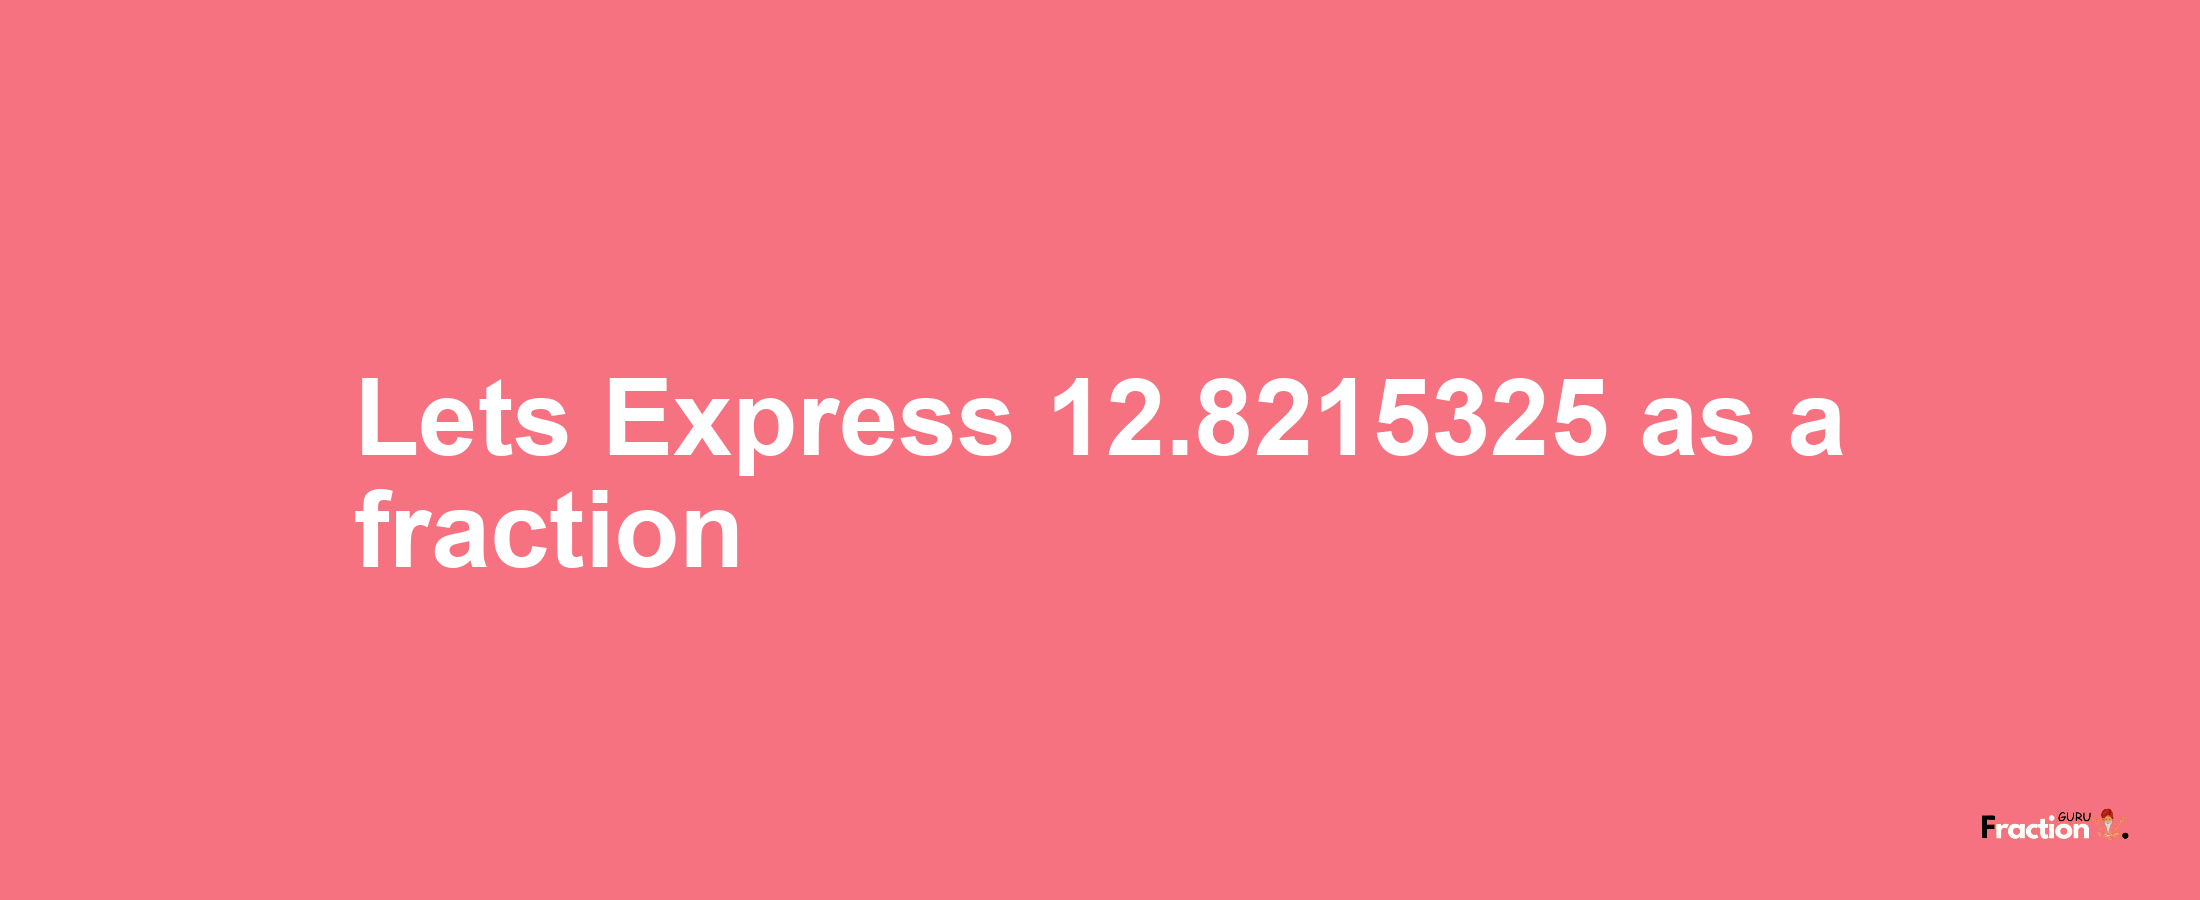 Lets Express 12.8215325 as afraction